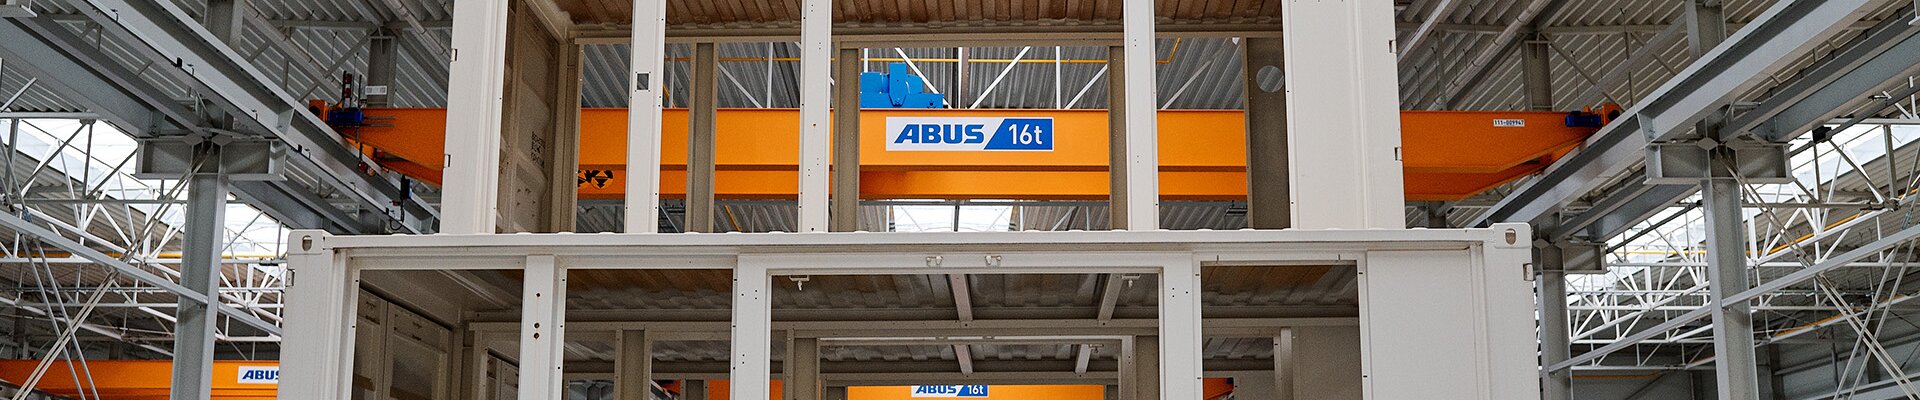 Investment in the future with ABUS cranes at FOGO in Poland